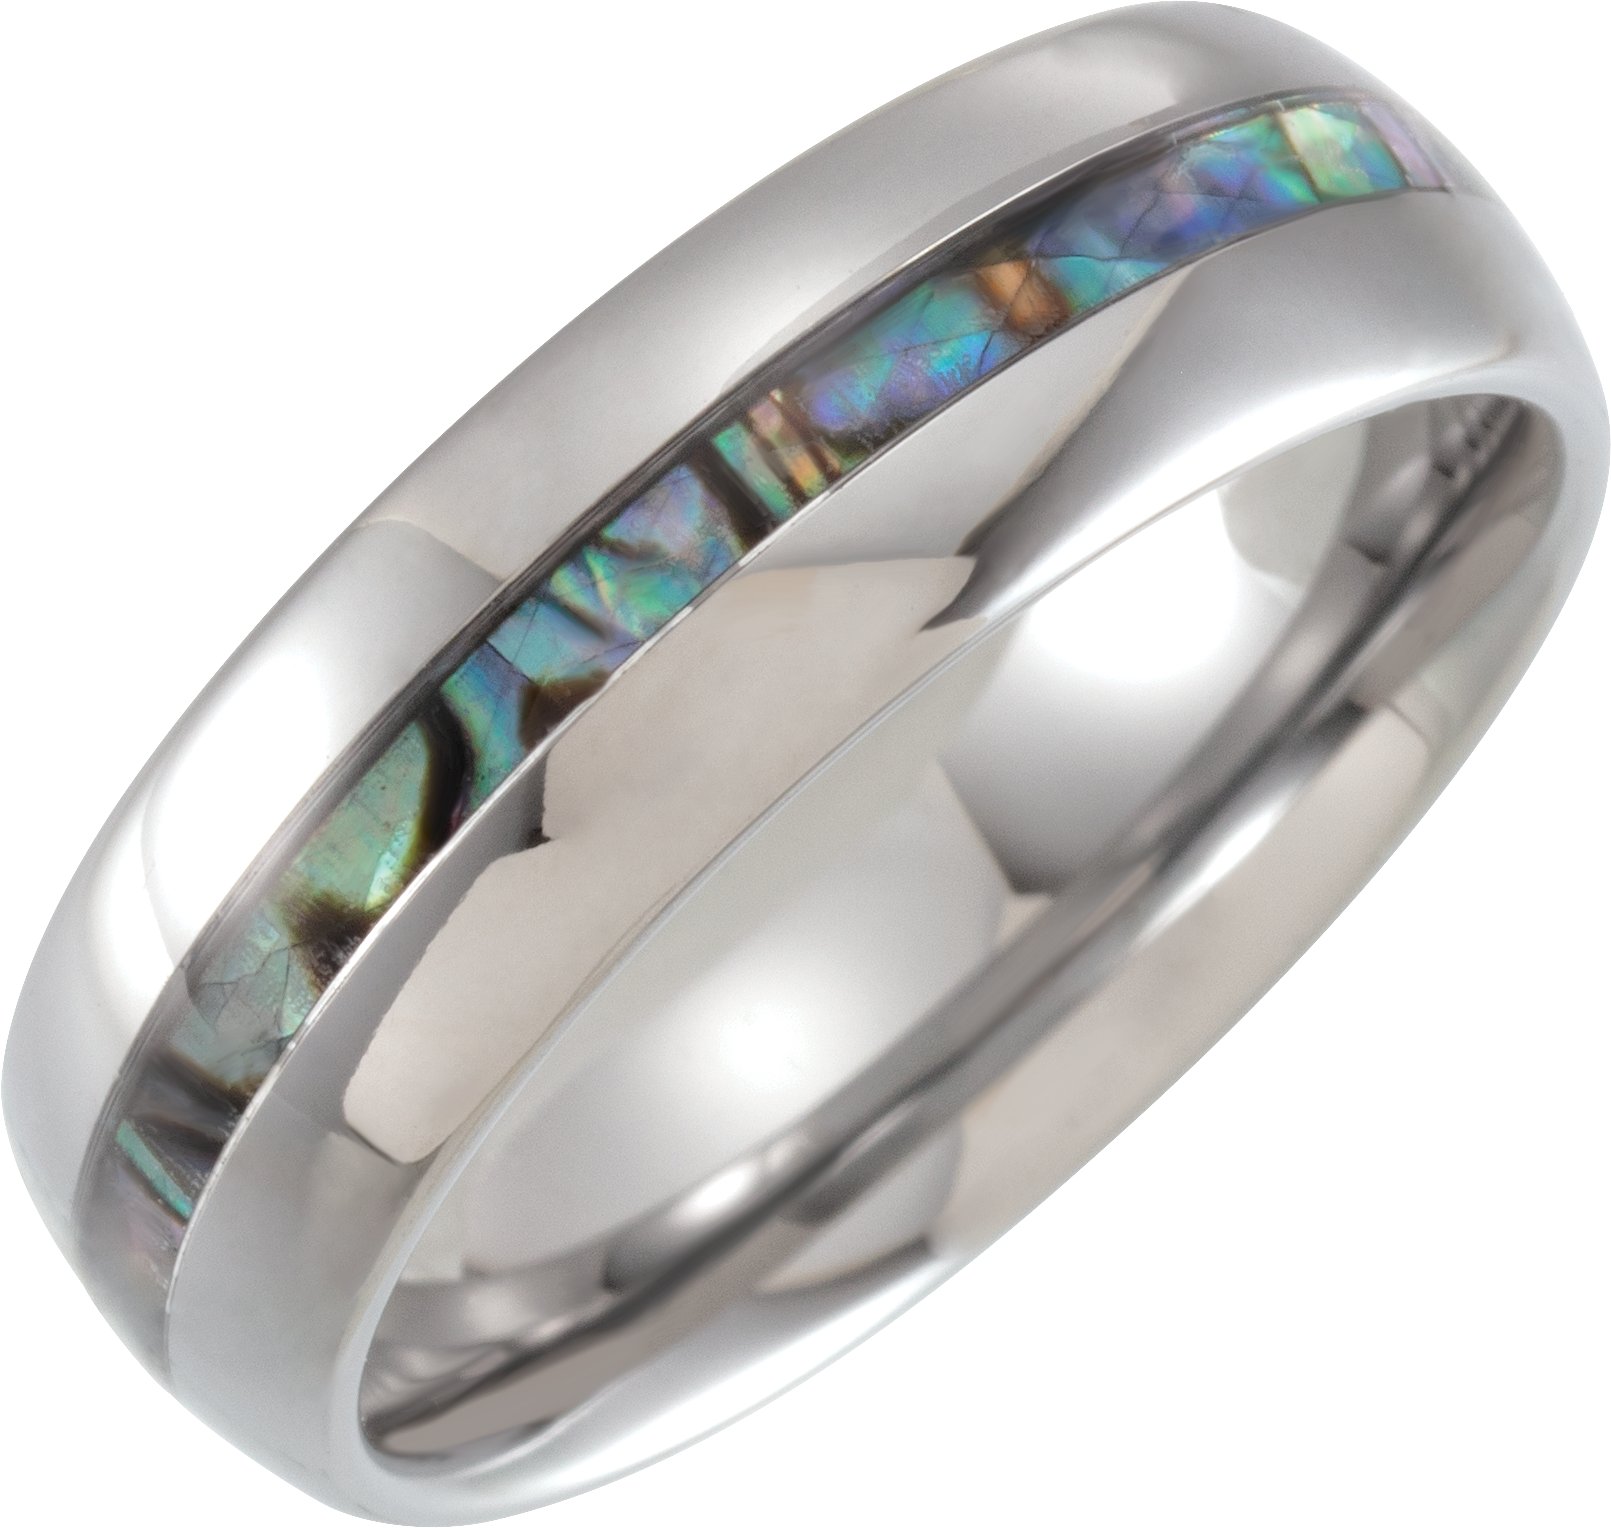 Tungsten 8 mm Half Round Band with Pearl Shell Inlay Size 12